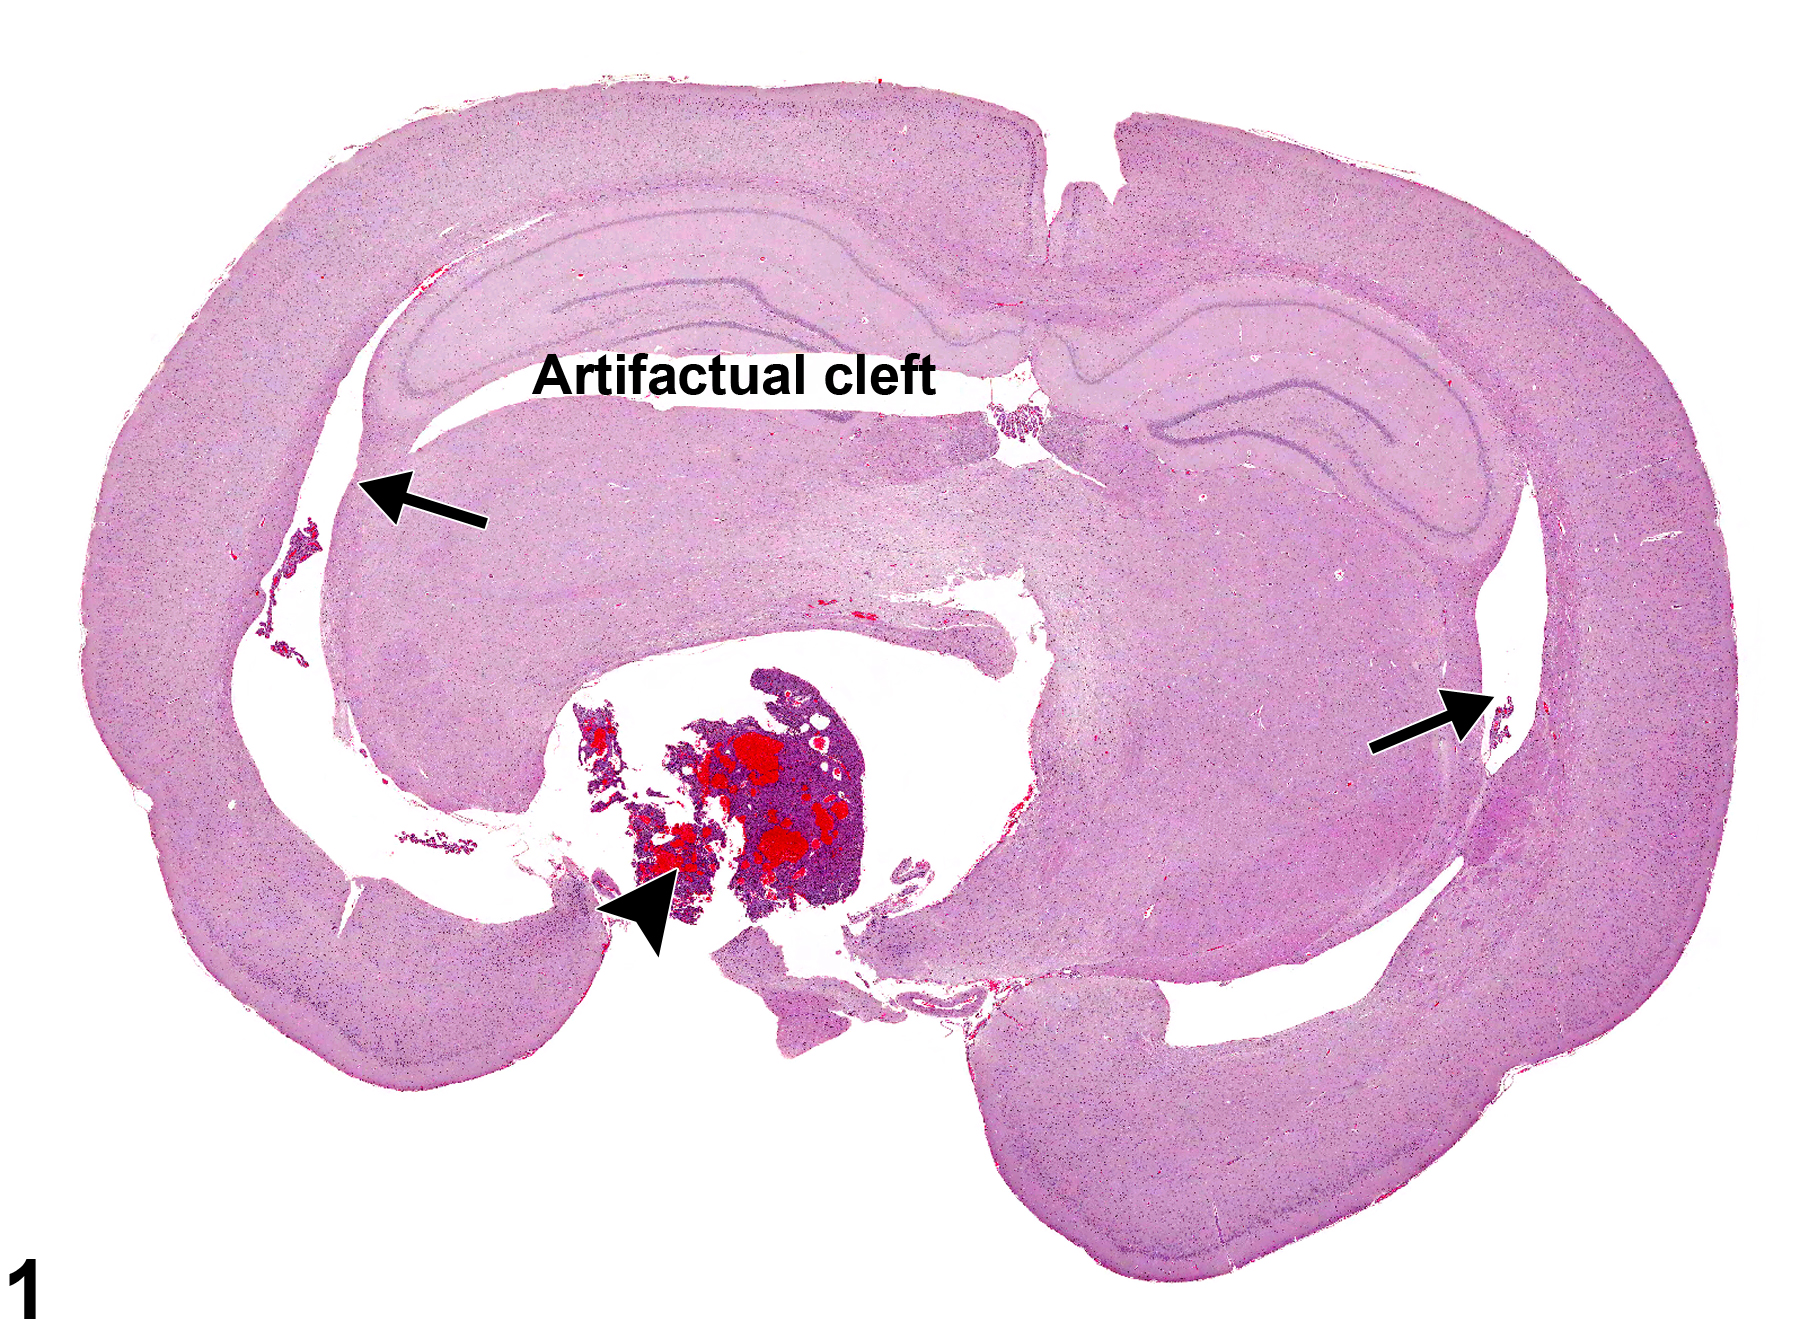 Image of hydrocephalus in the brain from a male F344/N rat in a chronic study